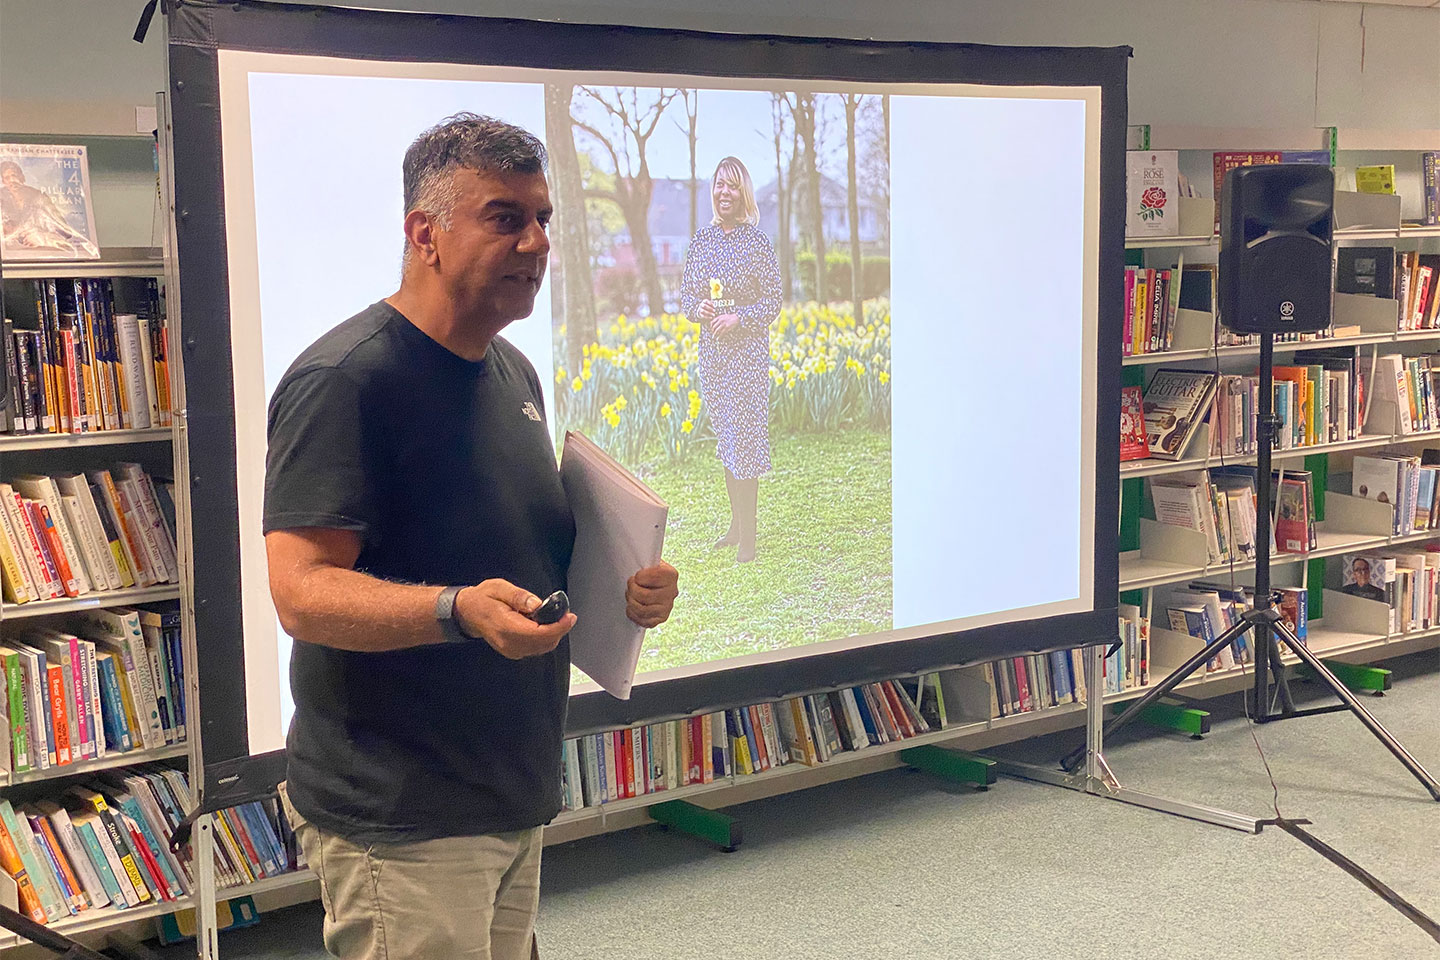 Anand Chabra giving a presentation about the portraits at Tipton Library, July 2022